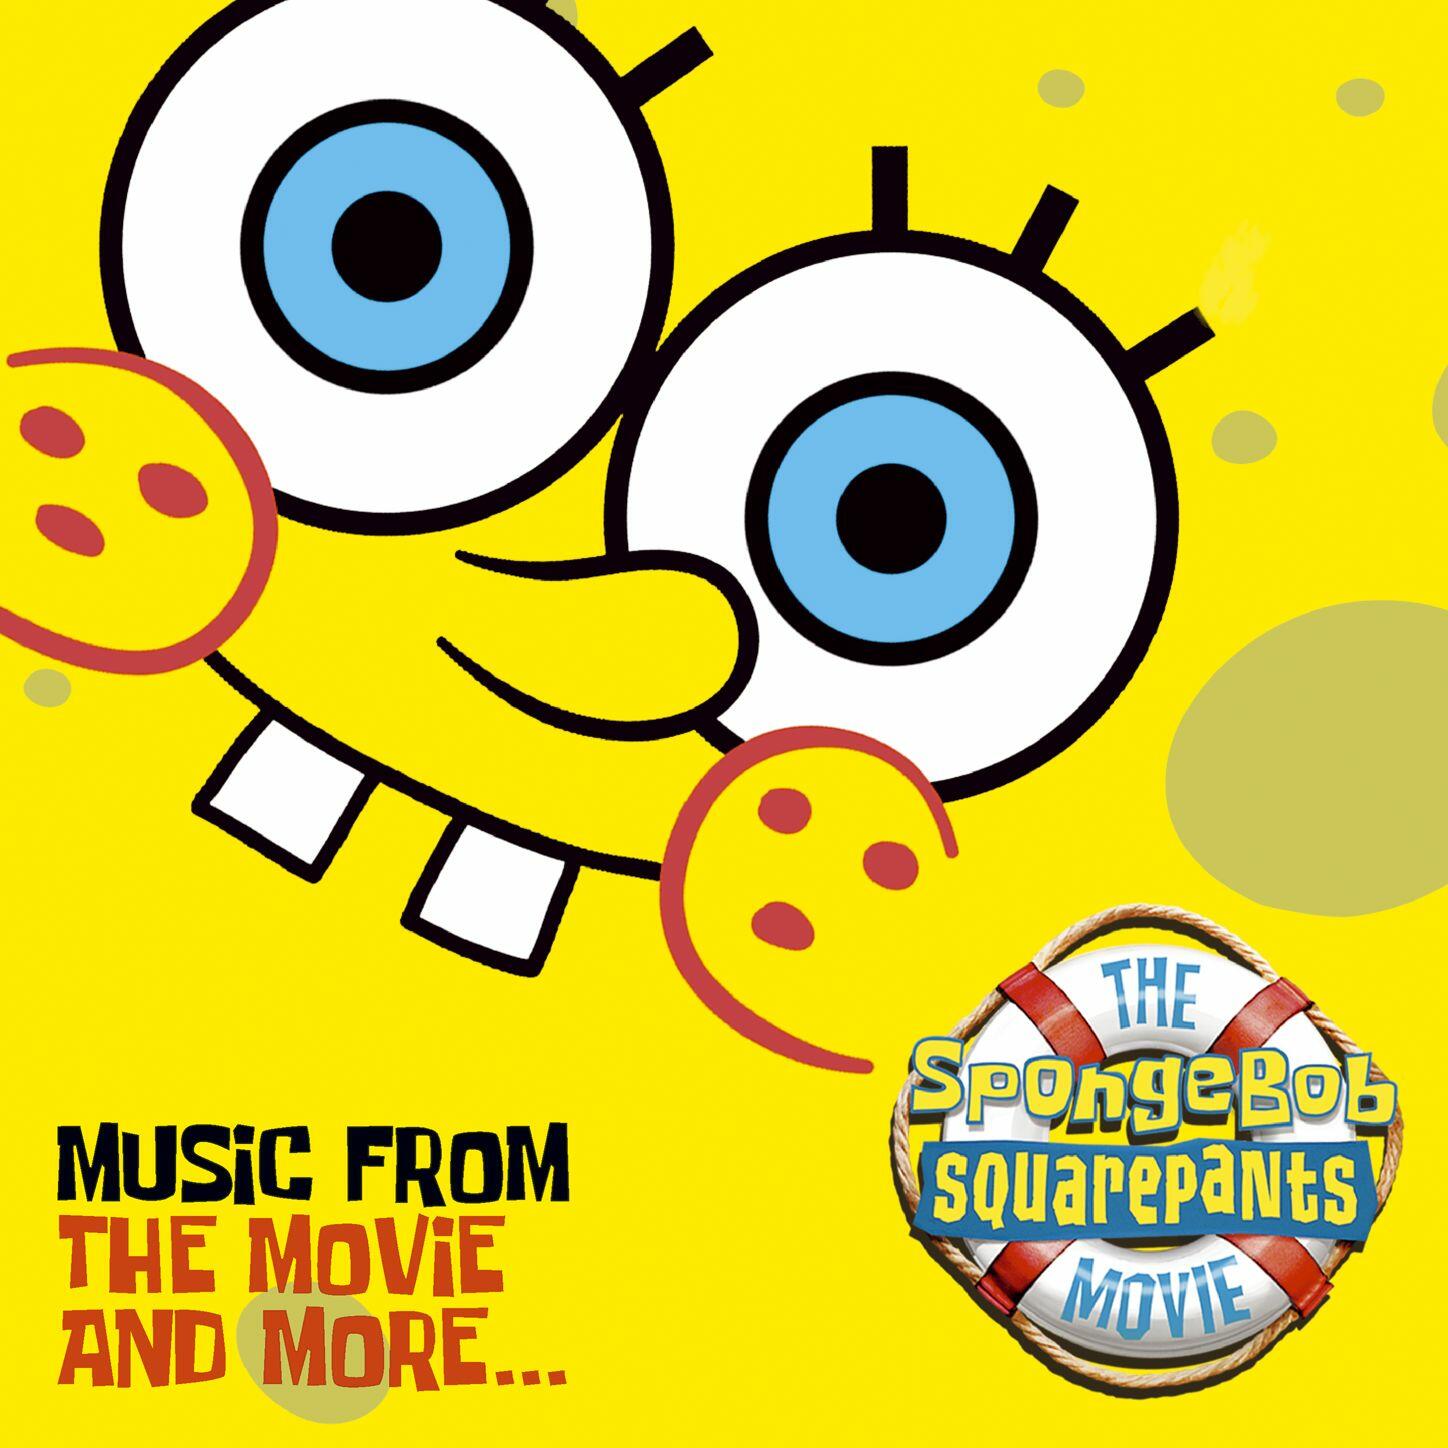 Tom Rothrock With Jim Wise The Spongebob Squarepants Movie Music From